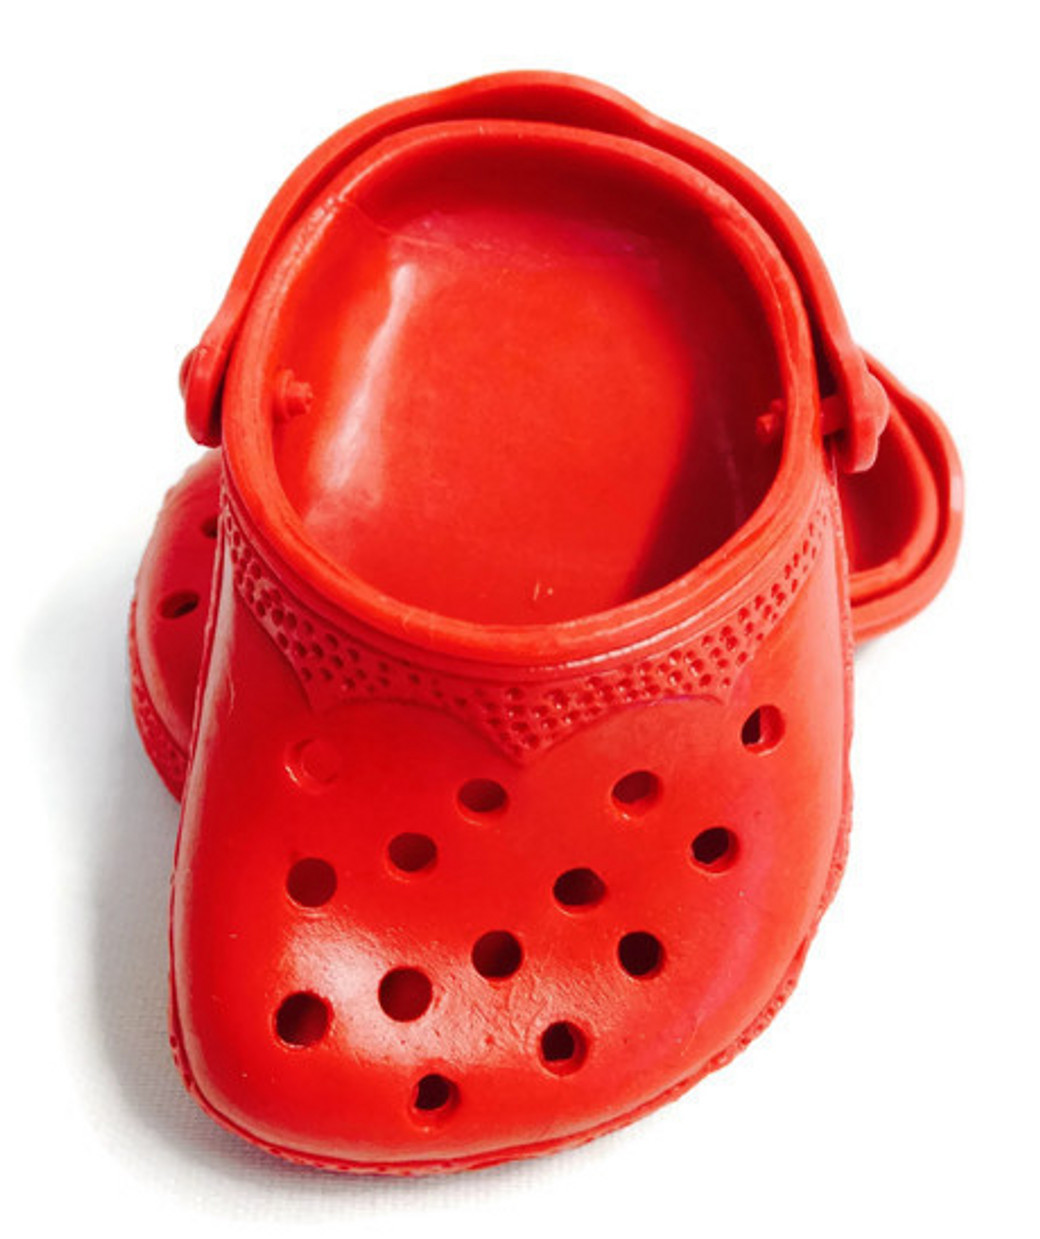 red croc shoes